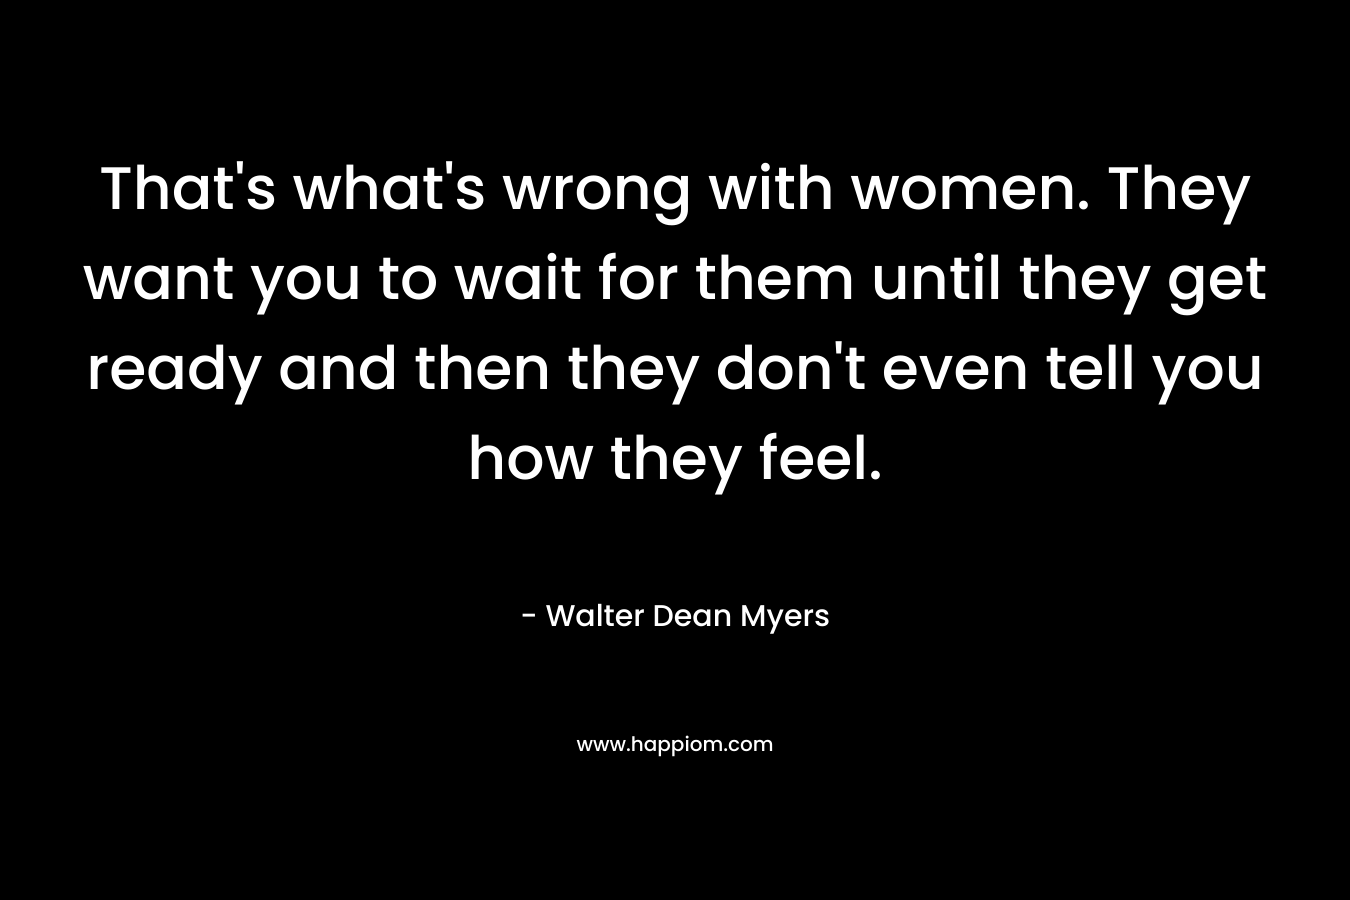 That's what's wrong with women. They want you to wait for them until they get ready and then they don't even tell you how they feel. 